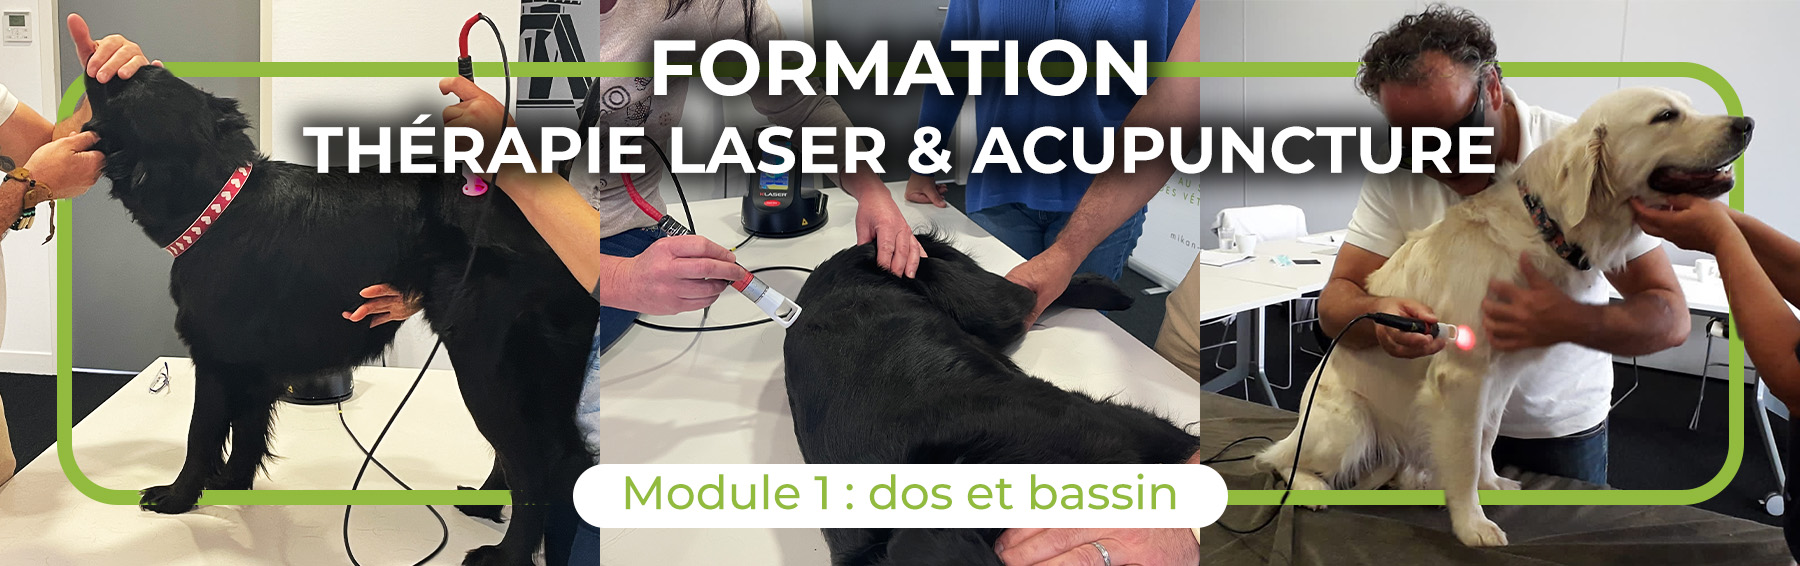 Formation Laser Acupuncture Mikan